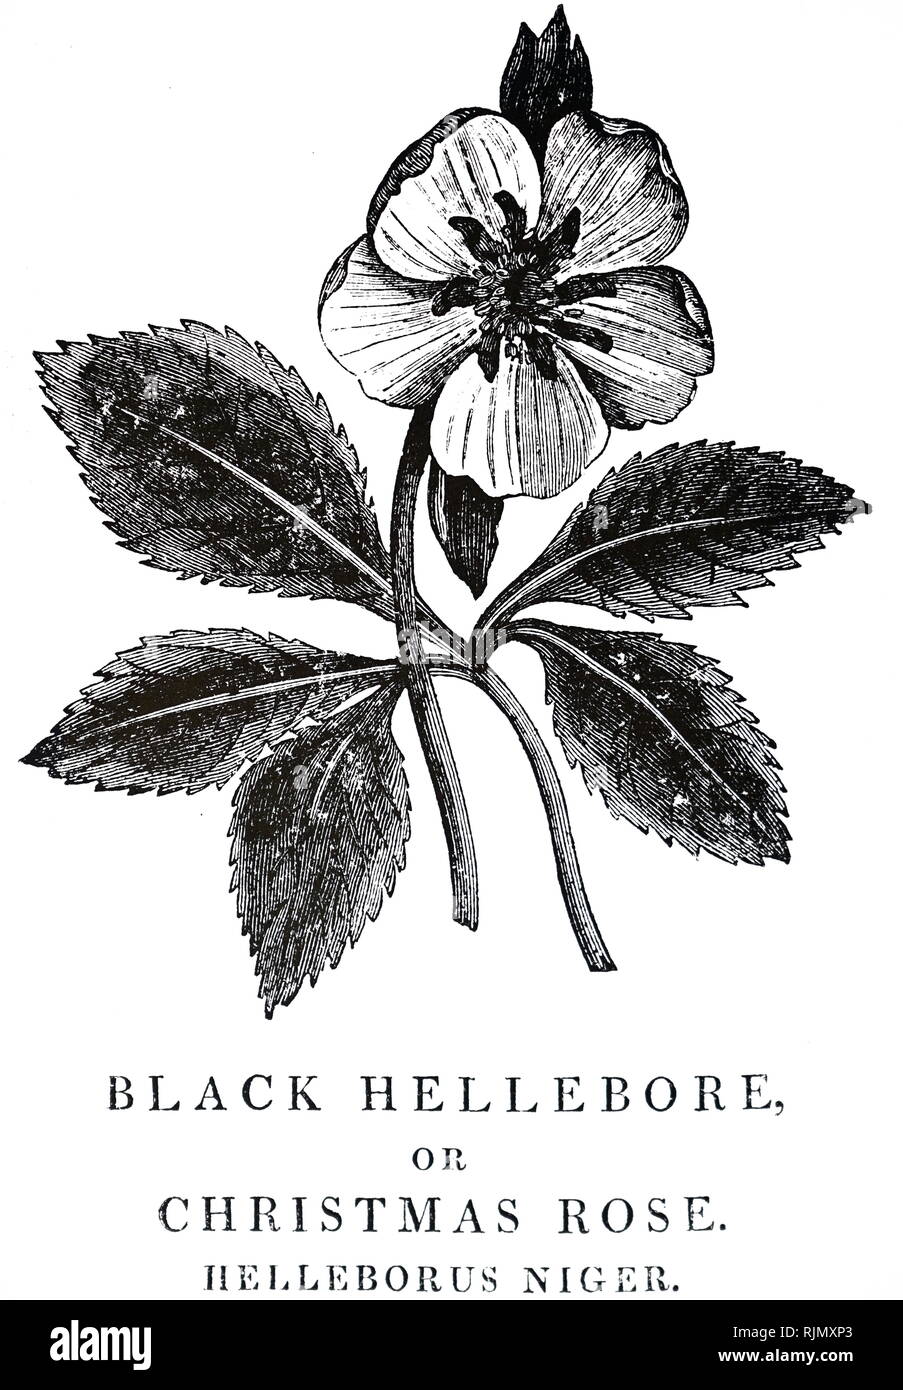 An engraving depicting HELLEBORUS NIGER - The Christmas Rose. The black roots of the plant were used to treat melancholy (attributed to black bile). In large doses a drastic purgative: in small doses, a useful diuretic. From Robert John Thornton's 'A New Family Herbal', London, 1810. Woodcut by Thomas Bewick Stock Photo